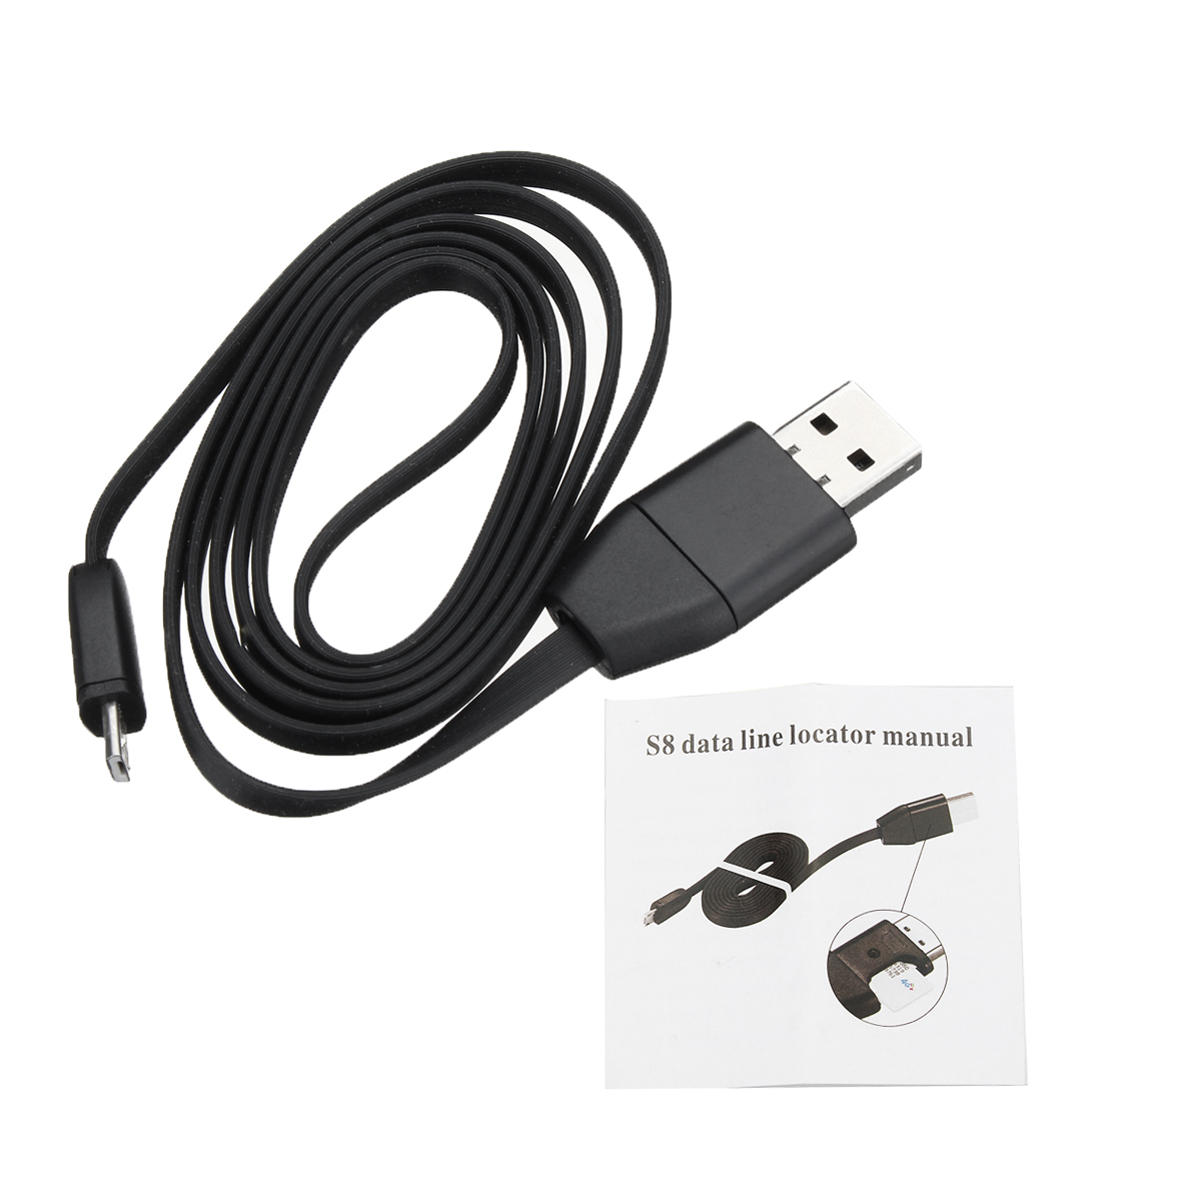 GSM SIM  Hidden Audio Listening Bug USB 2.0 To Micro USB Charge Data Cable BE